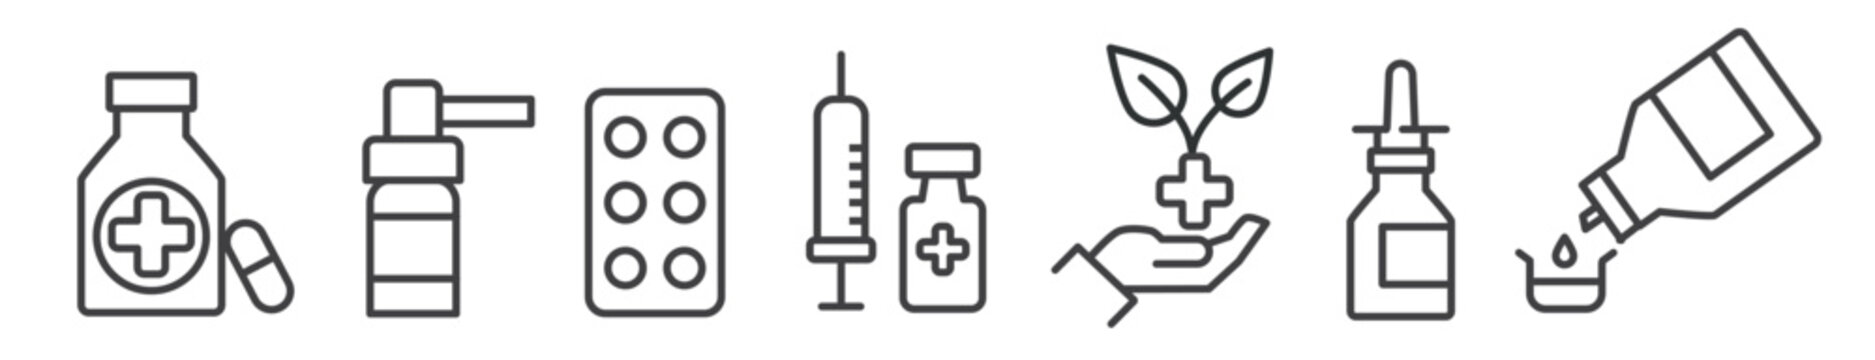 Medicine and medicinal products thin line icons - vector illustration